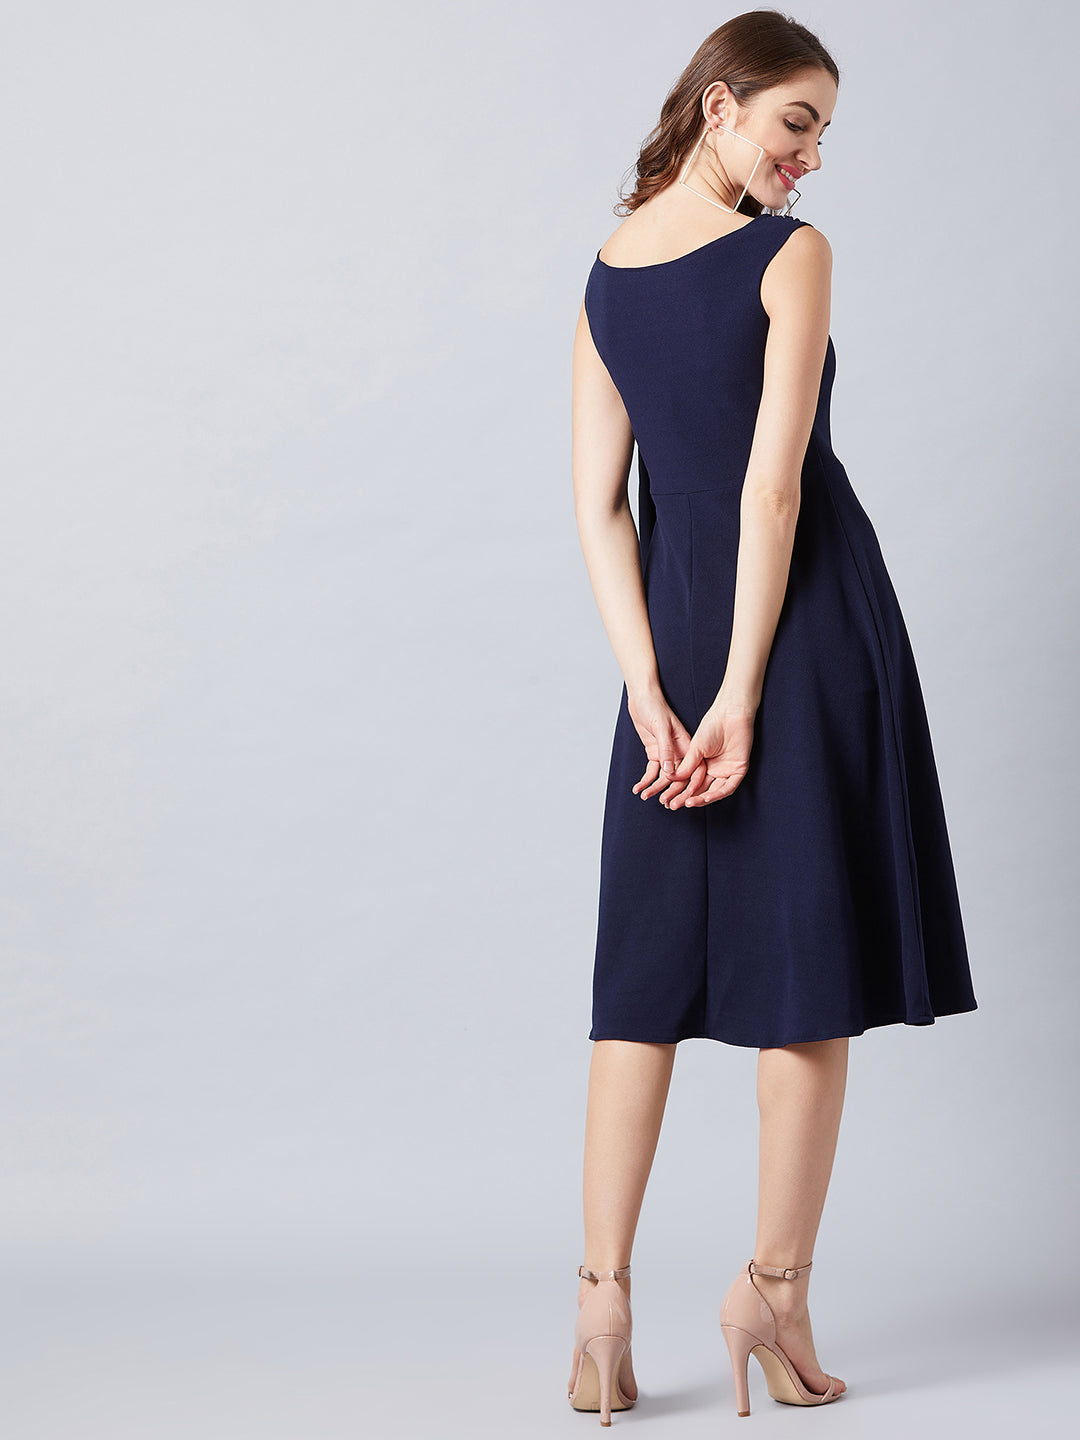 Athena Women Navy Blue Solid Fit and Flare Dress - Athena Lifestyle